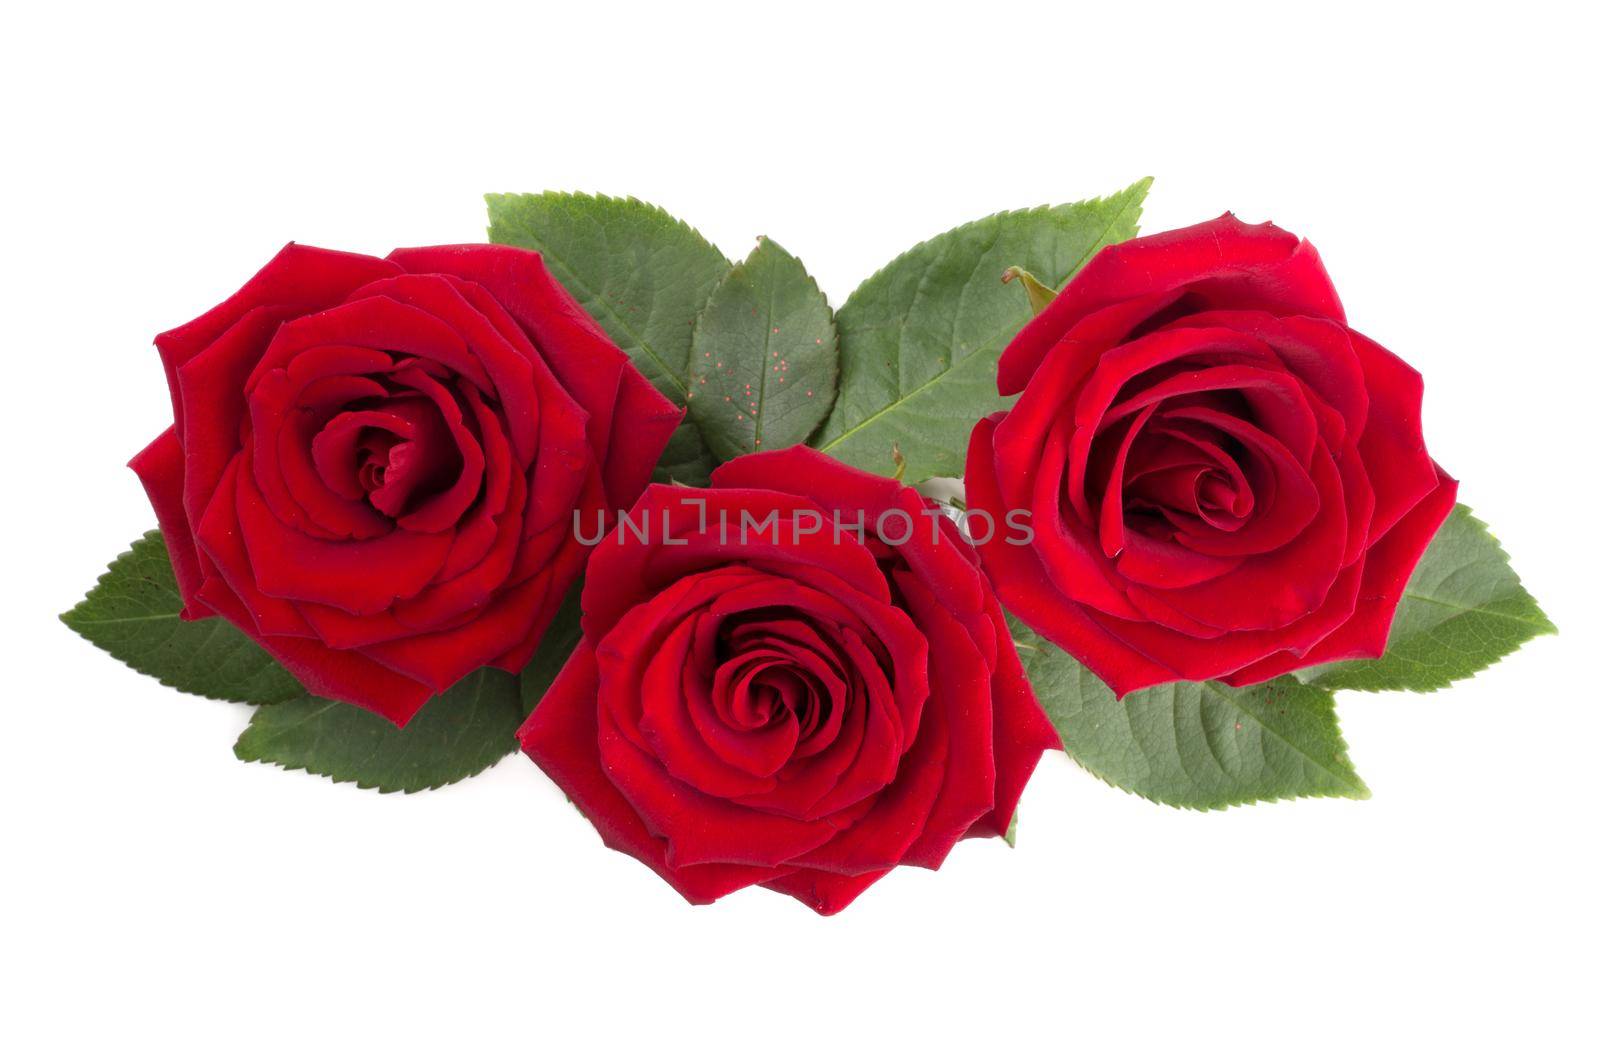 Red rose flowers and leaves arrangement isolated on white background, top view, design element for Valentines day